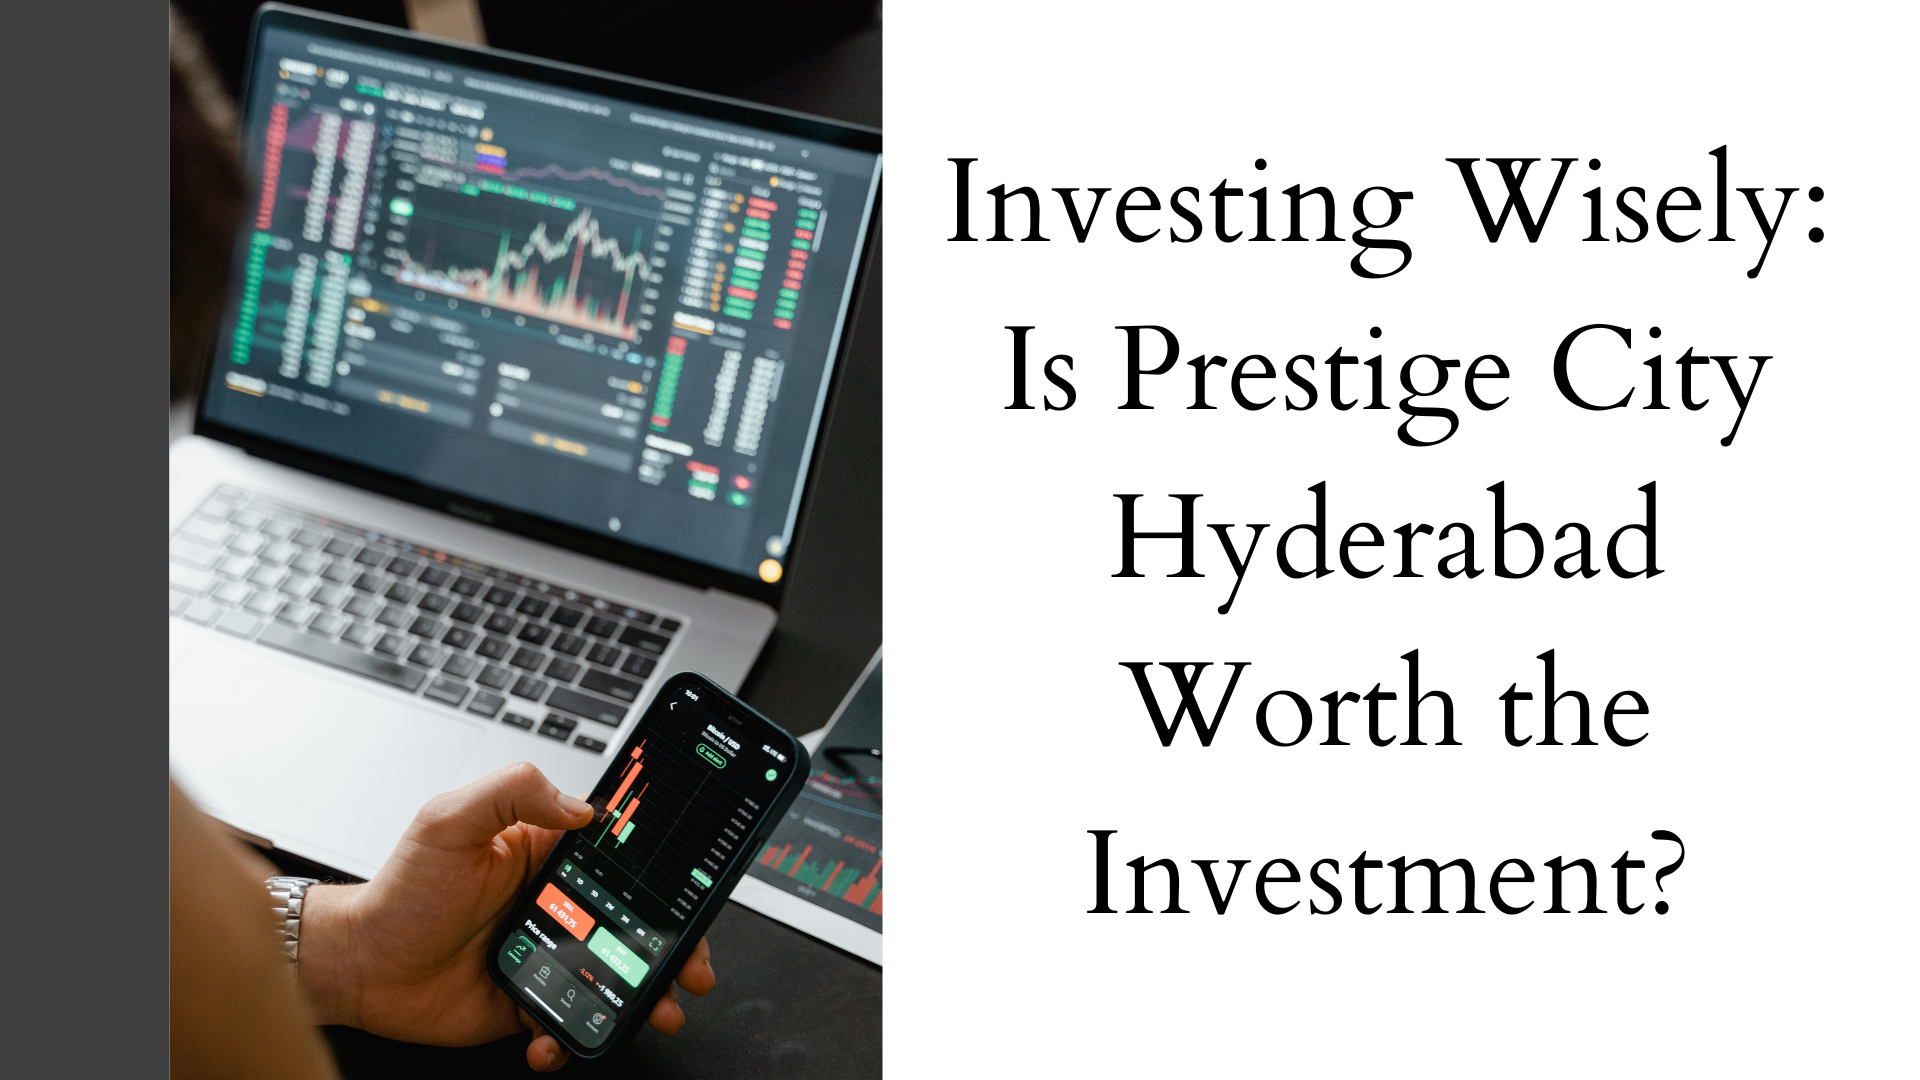 Investing Wisely: Is Prestige City Hyderabad Worth the Investment?